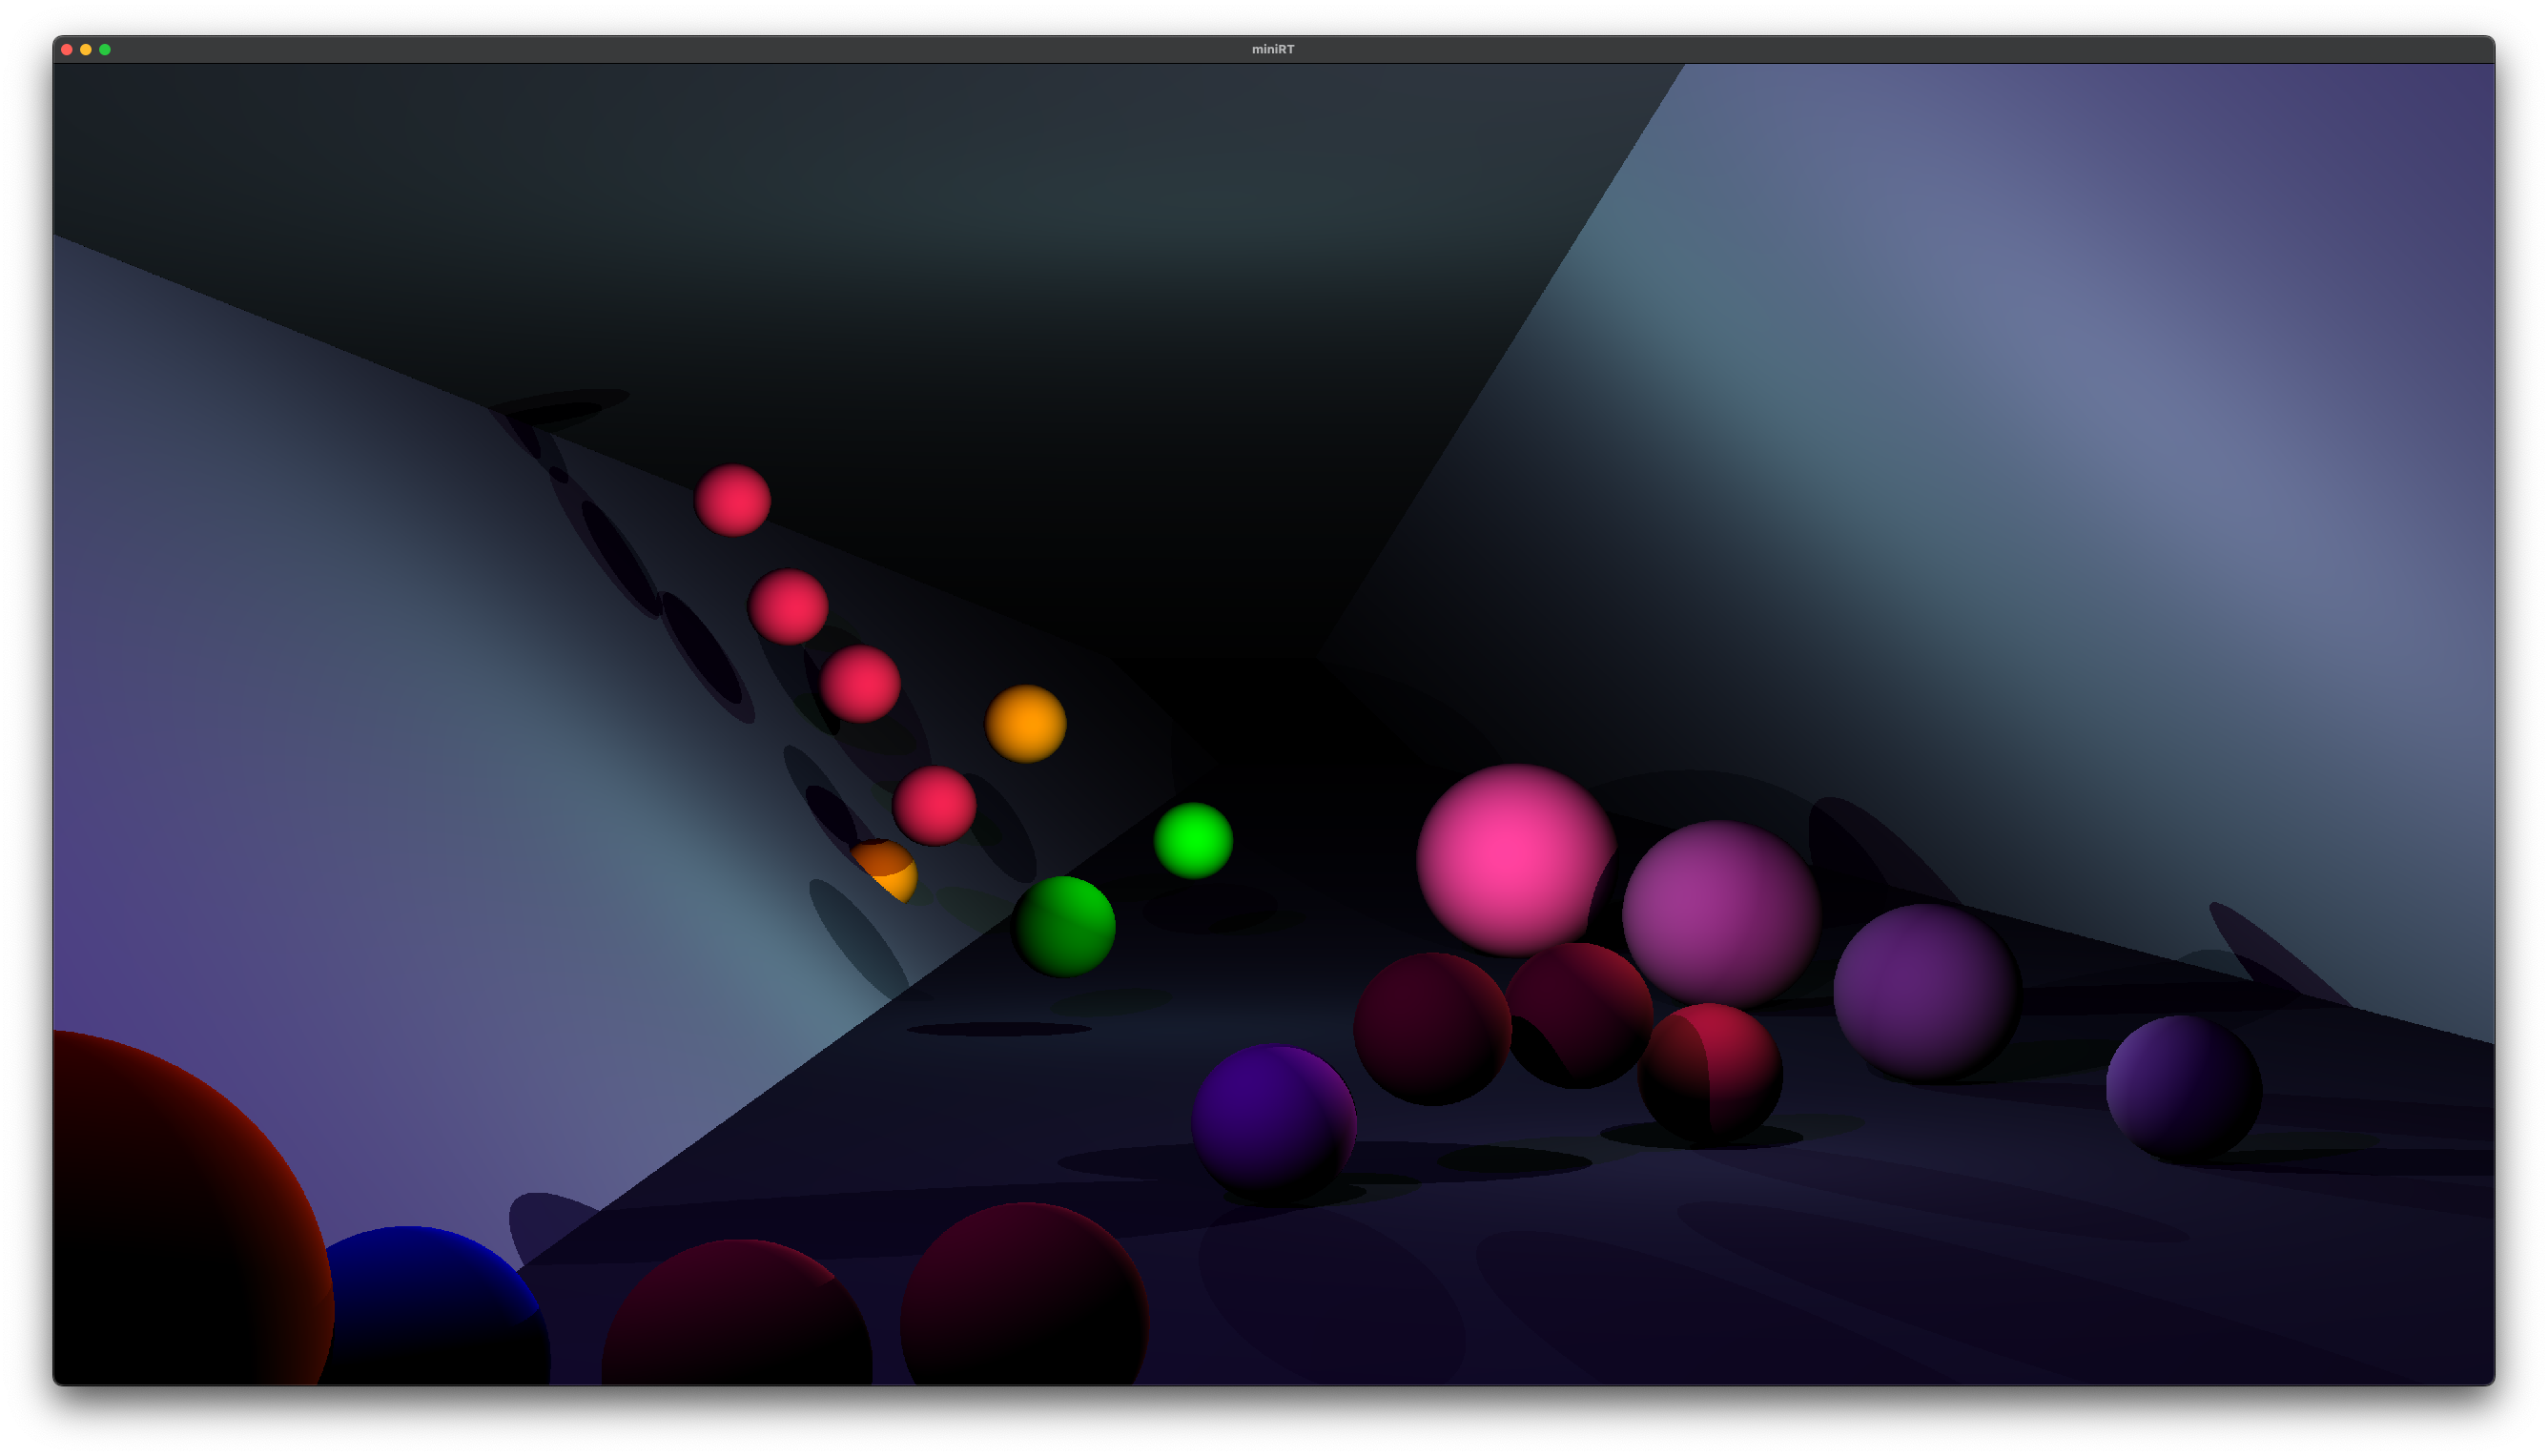 24 balls in a hallway with multicoloured lights and color transitions